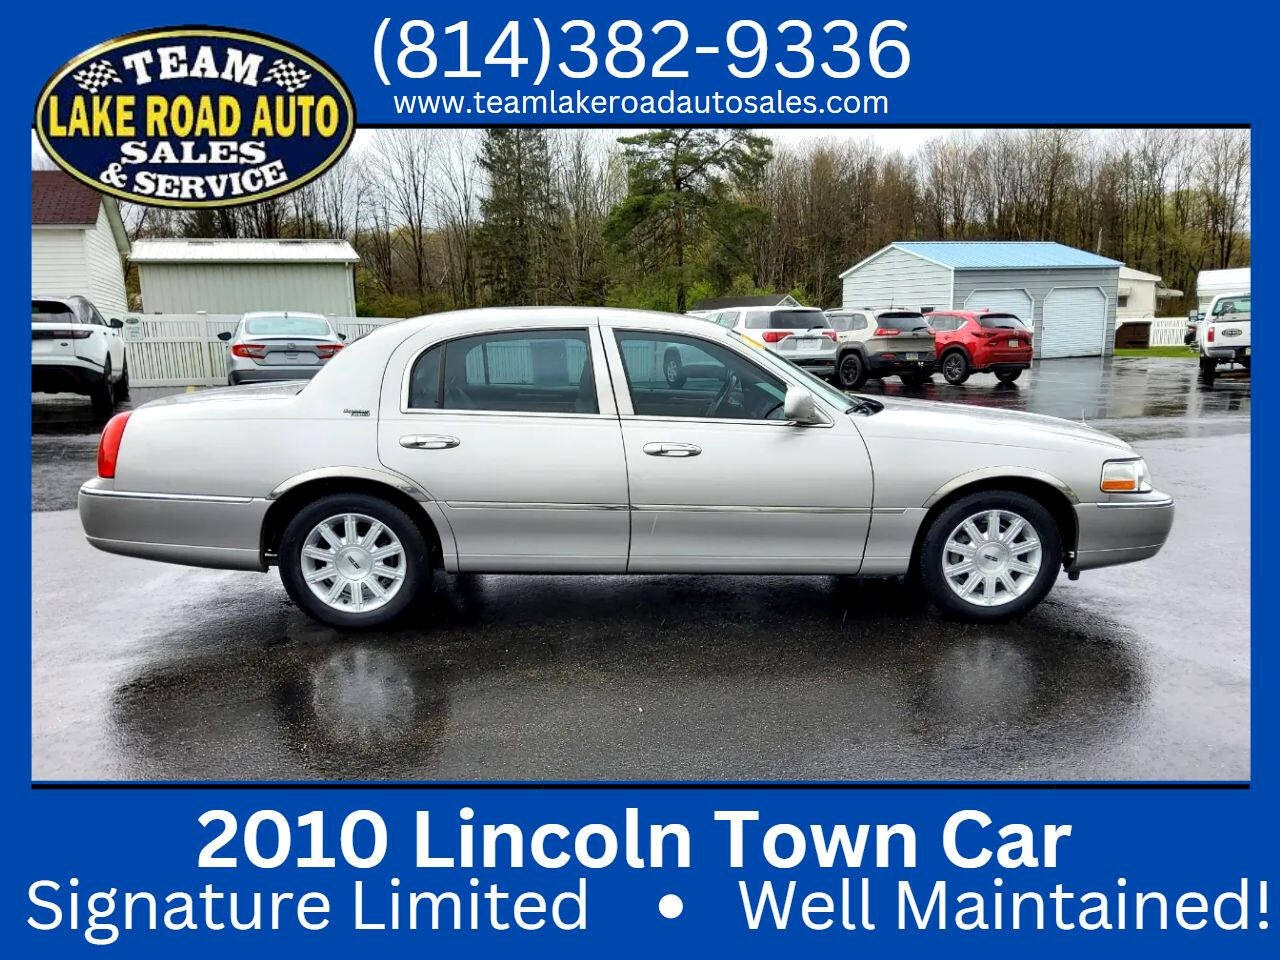 2010 Lincoln Town Car 4dr Sdn Signature Limited